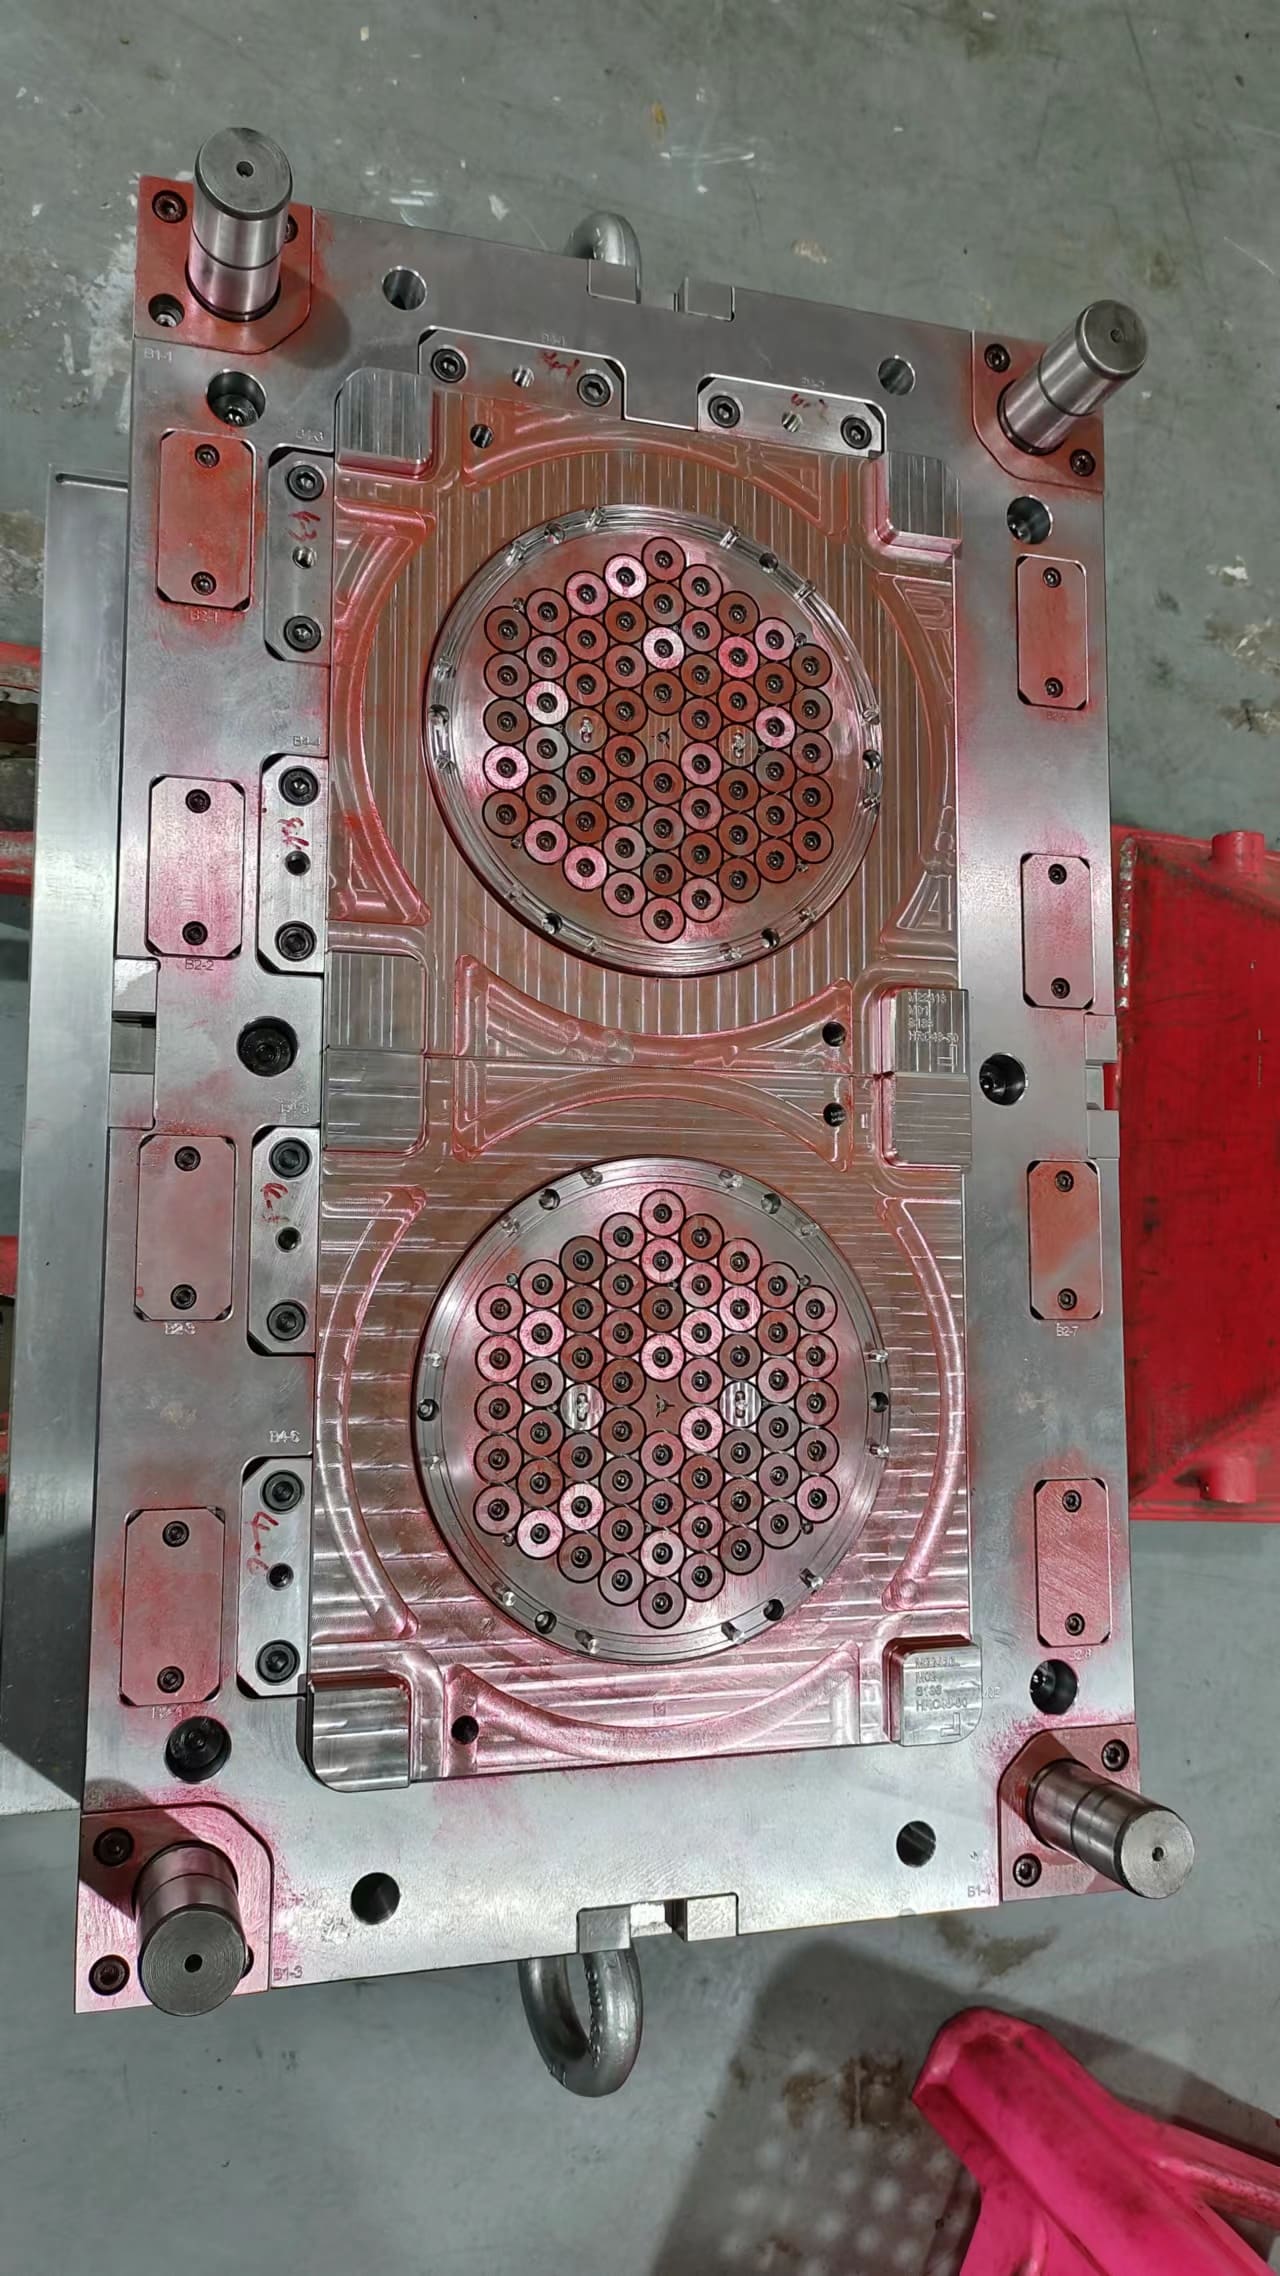 Working conditions of plastic mold